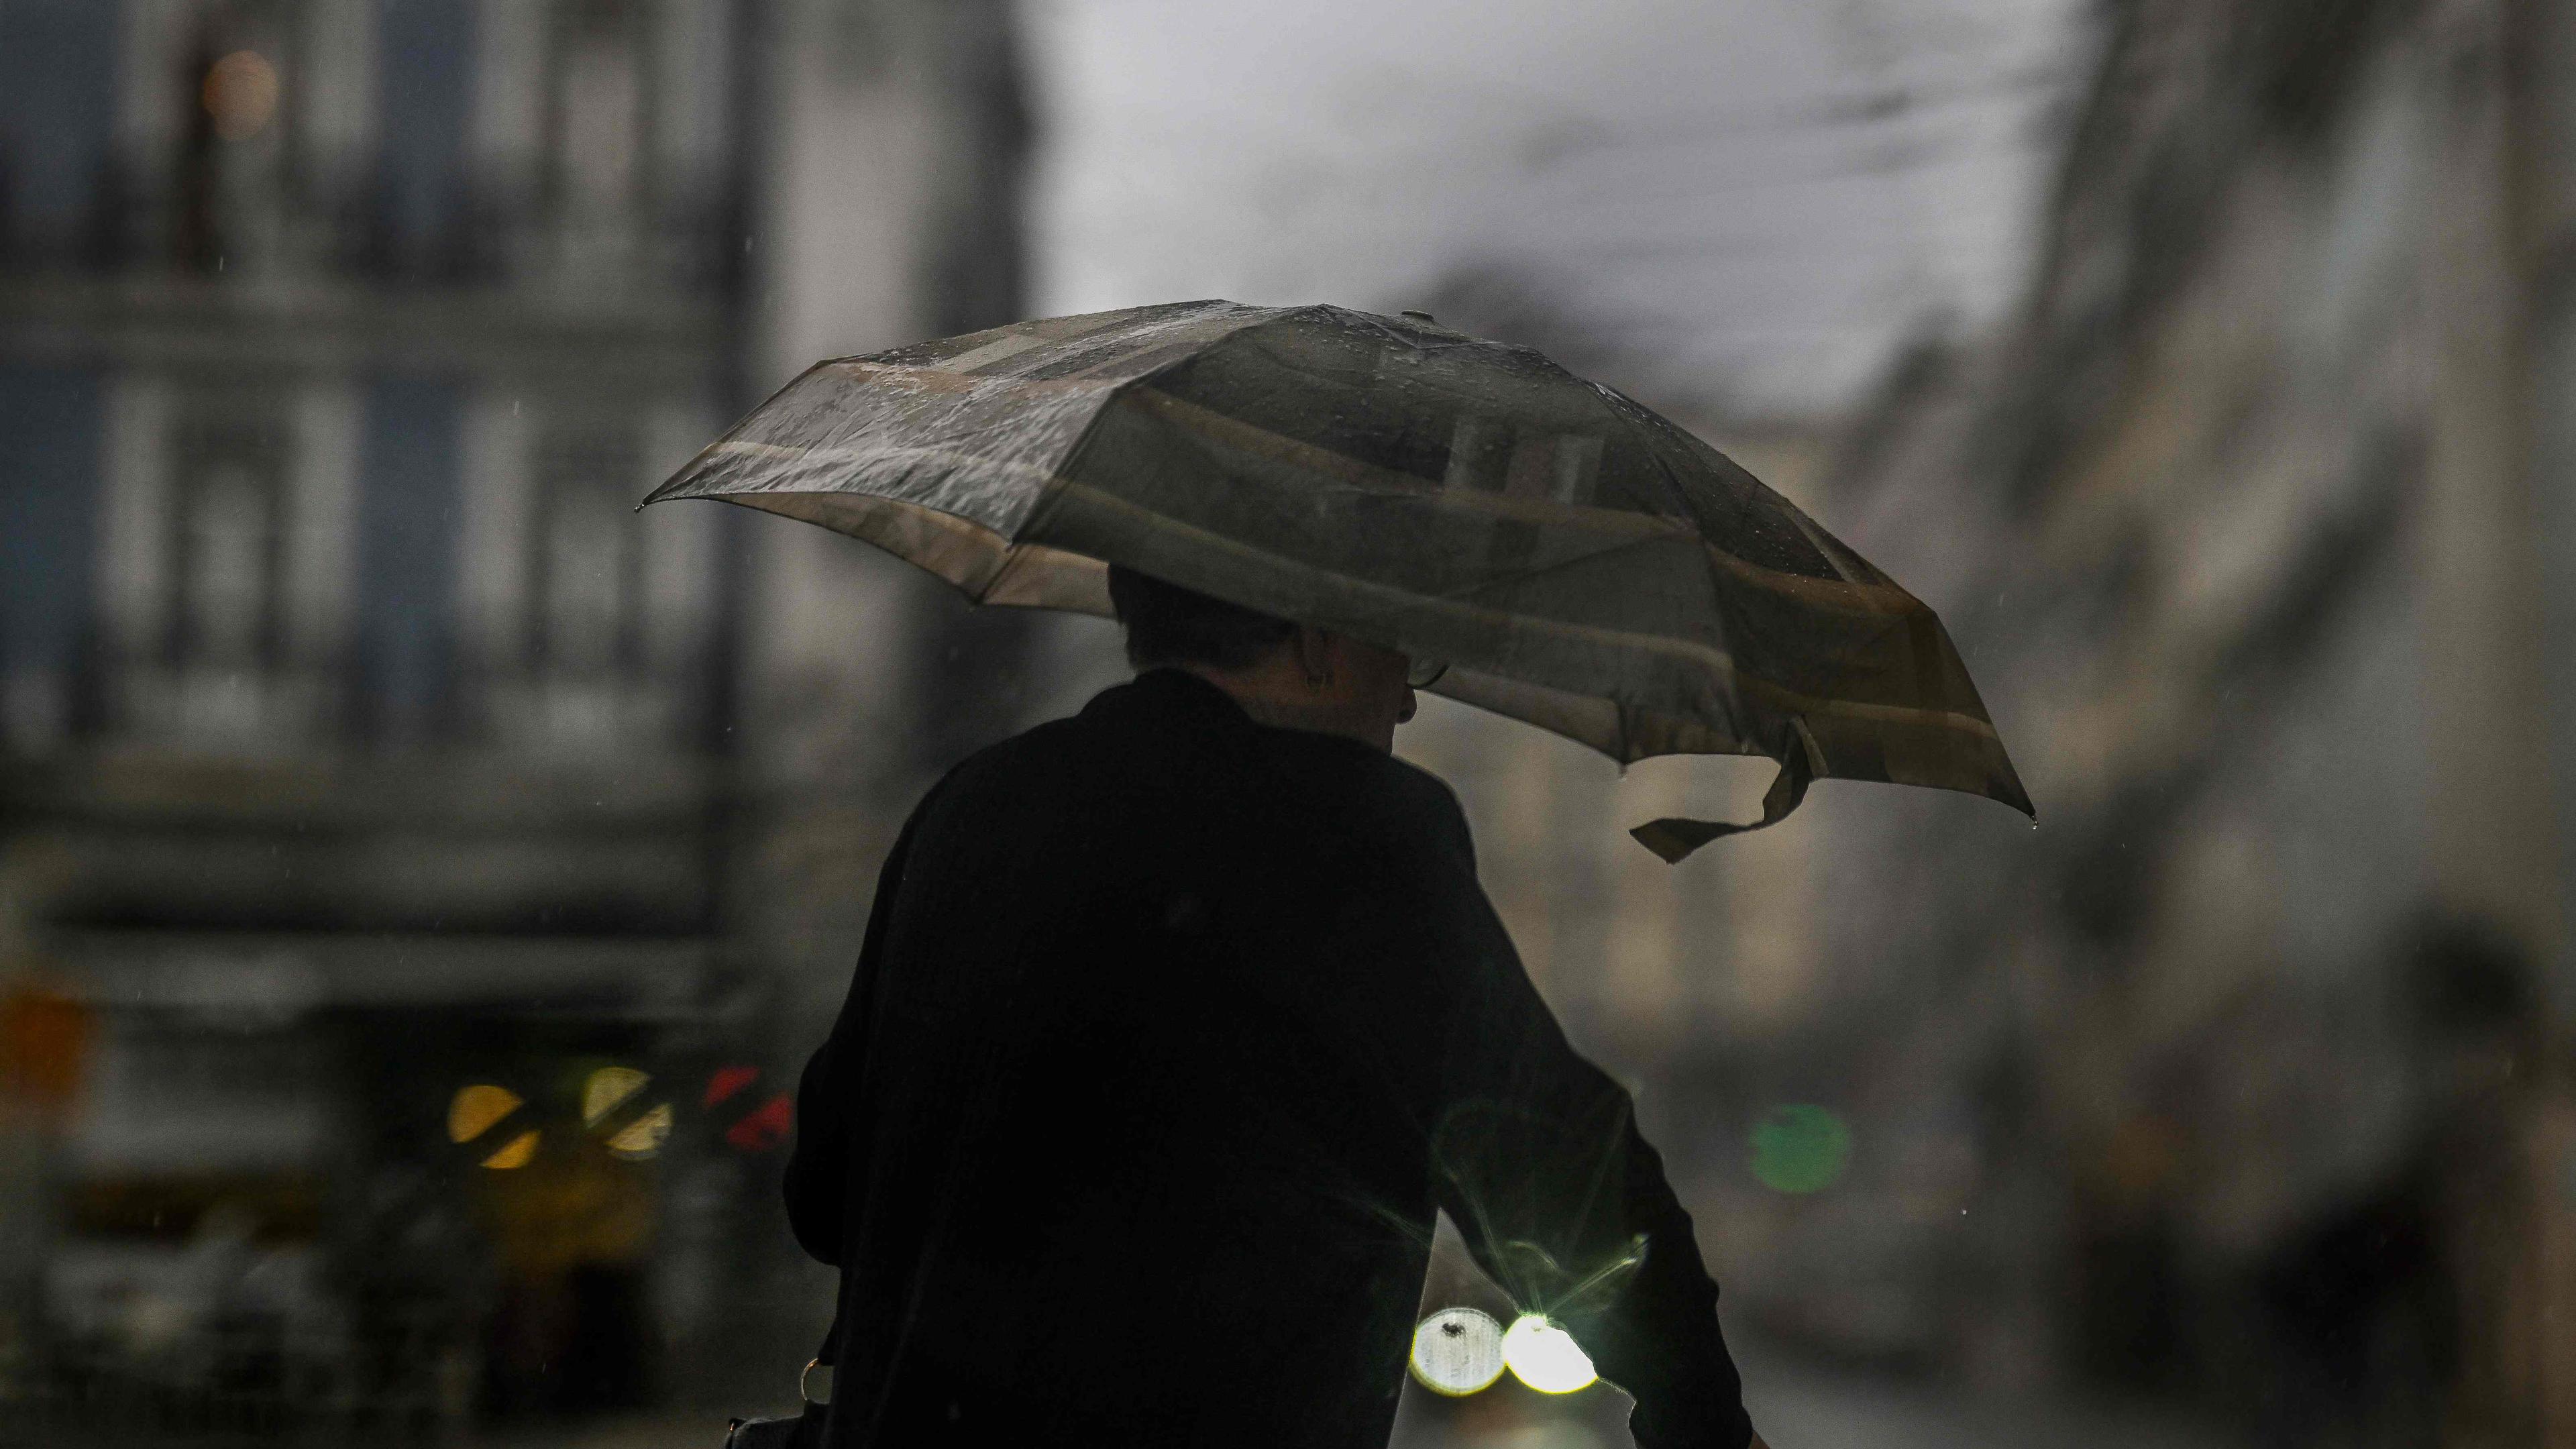 A woman takes shelter under an umbrella during a heavy rain caused by storm Aline in Lisbon, on October 19, 2023. Portugal was hit by violent winds and heavy rain which caused flooding and falling trees, especially in the regions of Lisbon and Porto (north), civil protection said. (Photo by Patricia DE MELO MOREIRA / AFP)